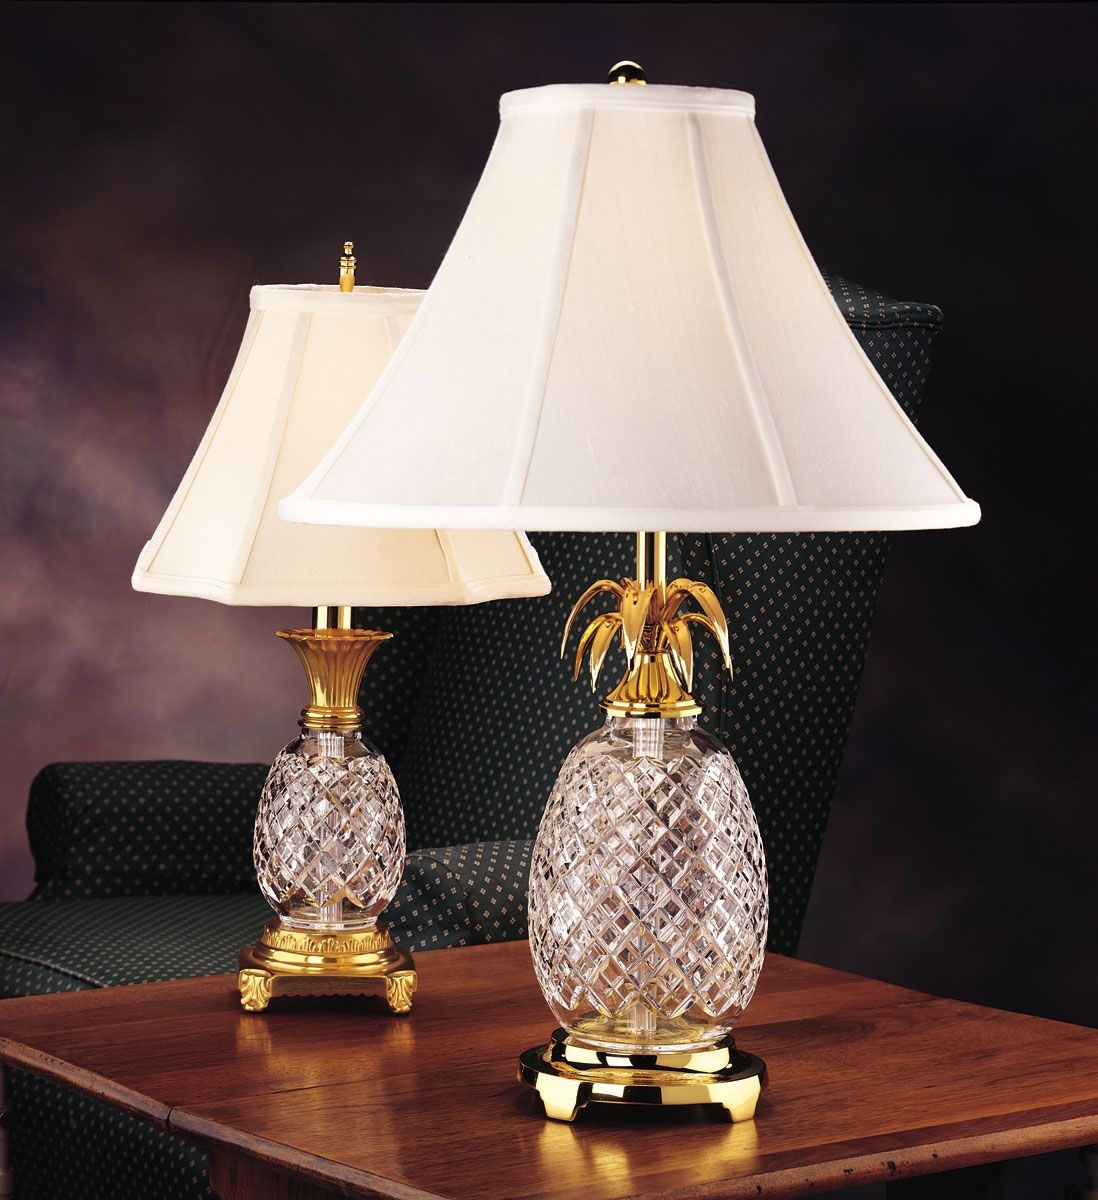 Waterford hospitality accent lamp